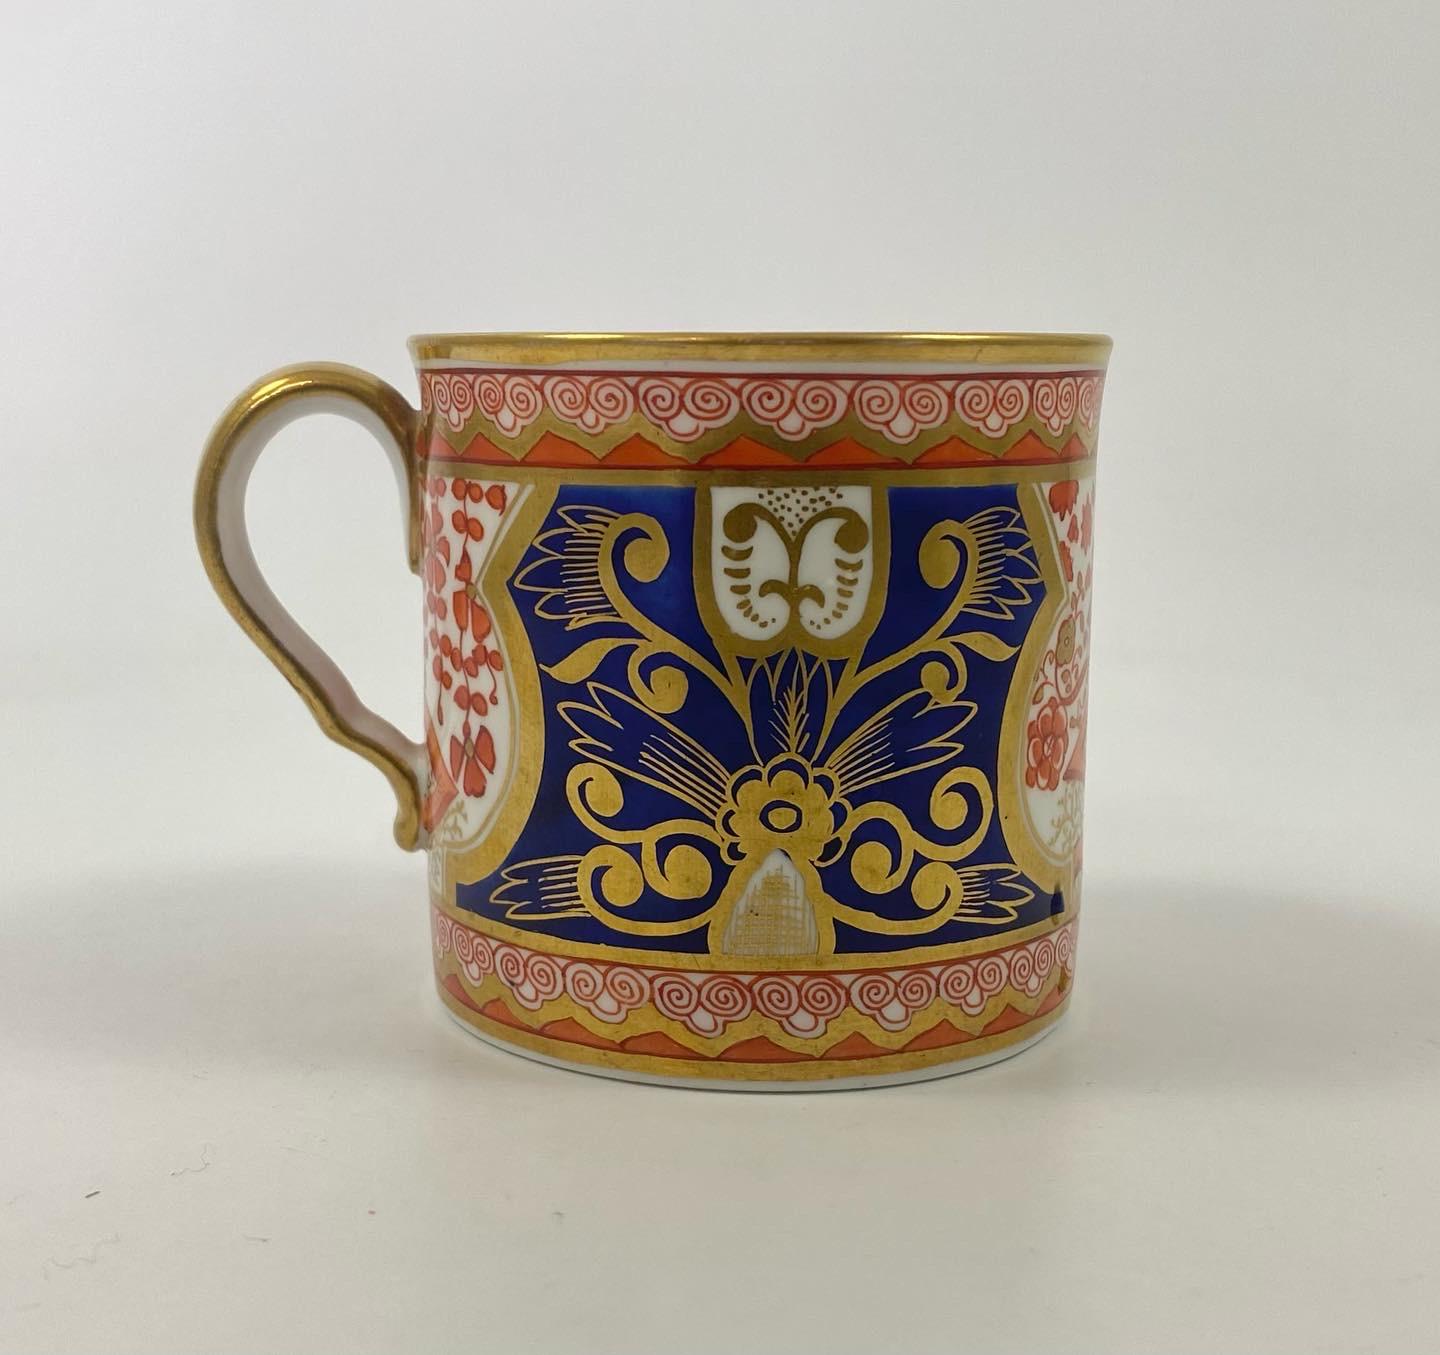 Spode porcelain coffee can, c. 1810. Painted in iron red enamels with stylised flowering plants, within shaped panels, on a cobalt blue ground, embellished with gilt floral scrollwork. The borders with a continuous Ruyi head motif.
Having a gilded